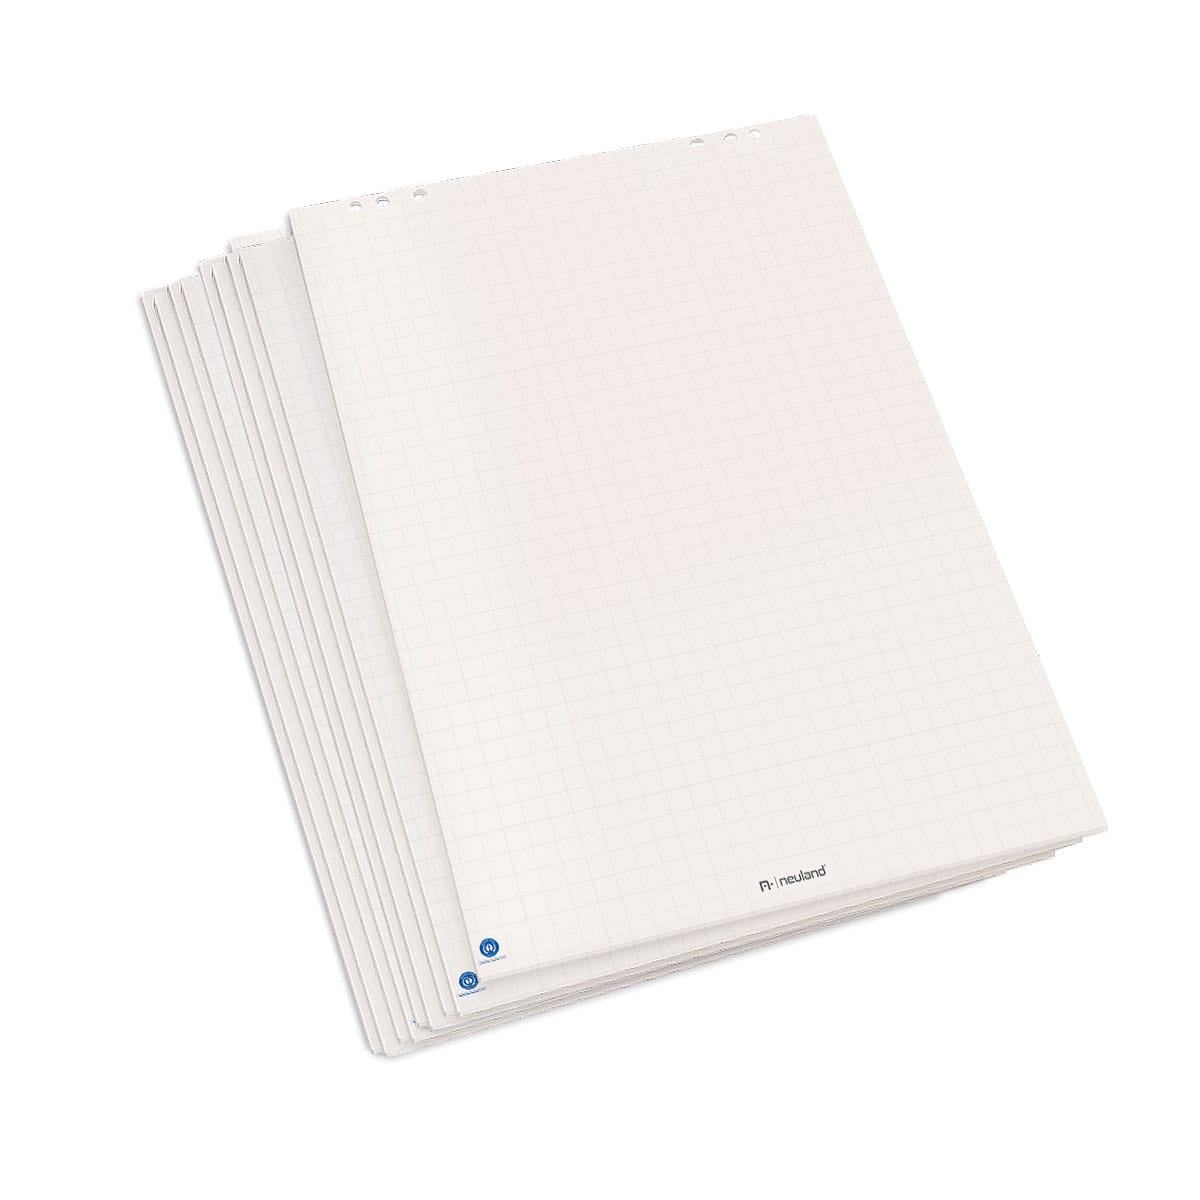 FlipChart Paper, white recycled - checker: 5 pads/rolled- 10er block (flachliegend)